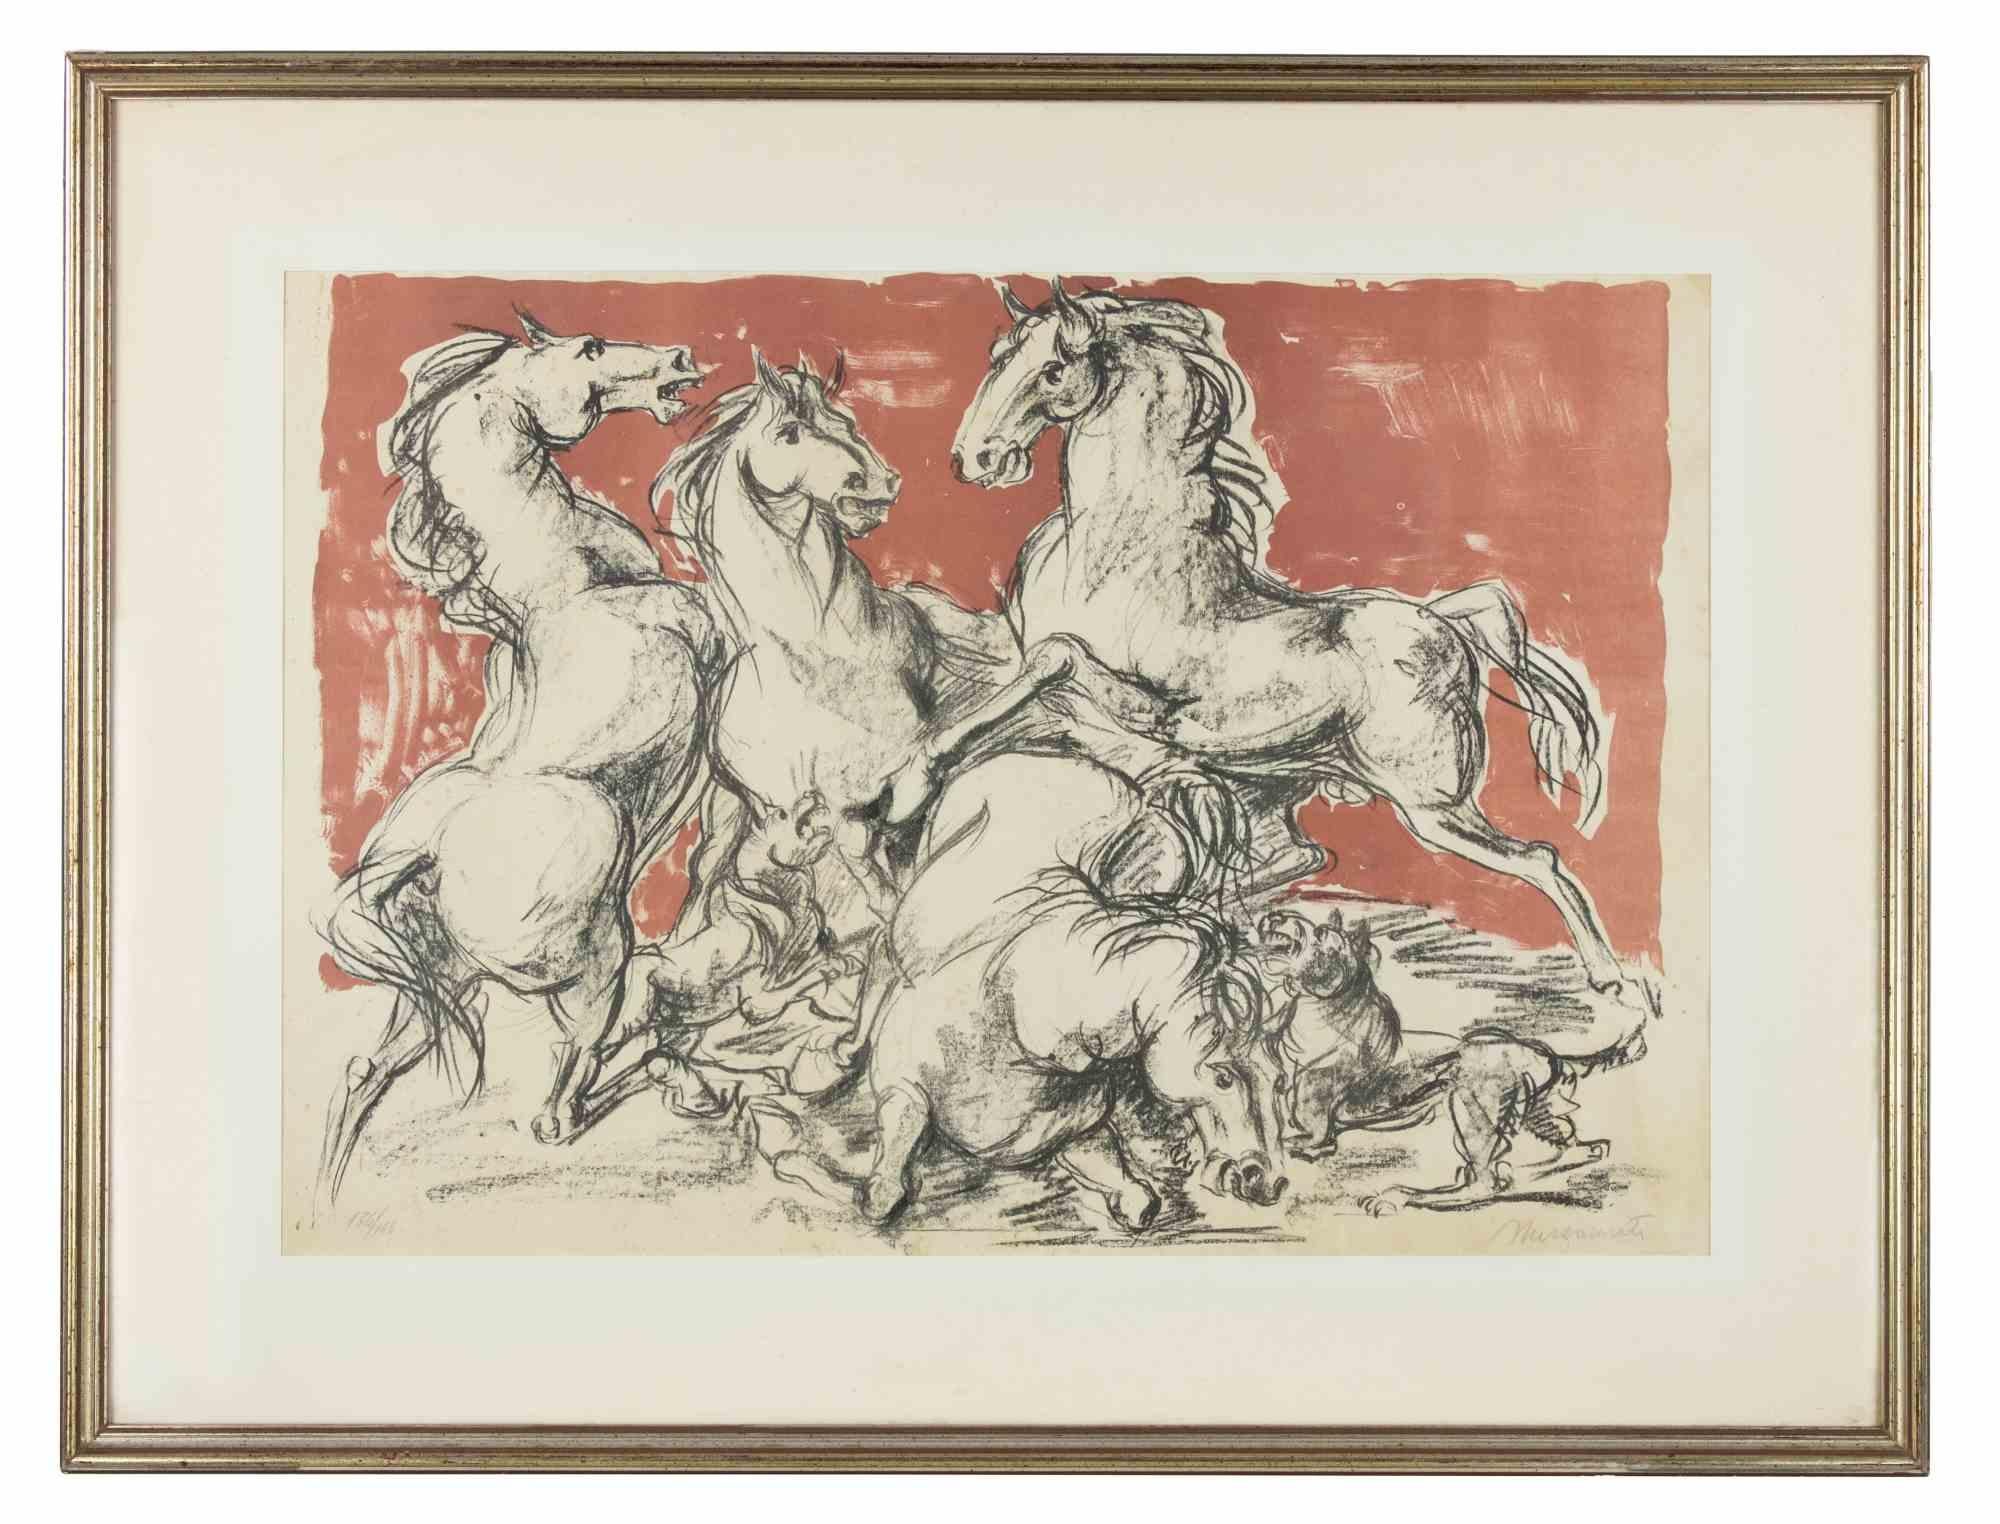 Horses is a modern artwork realized by Marino Mazzacurati in the mid-20th century.

Mixed colored lithograph.

Hand signed by the artist on the lower margin.

Includes frame: 65 x 1 x 86 cm